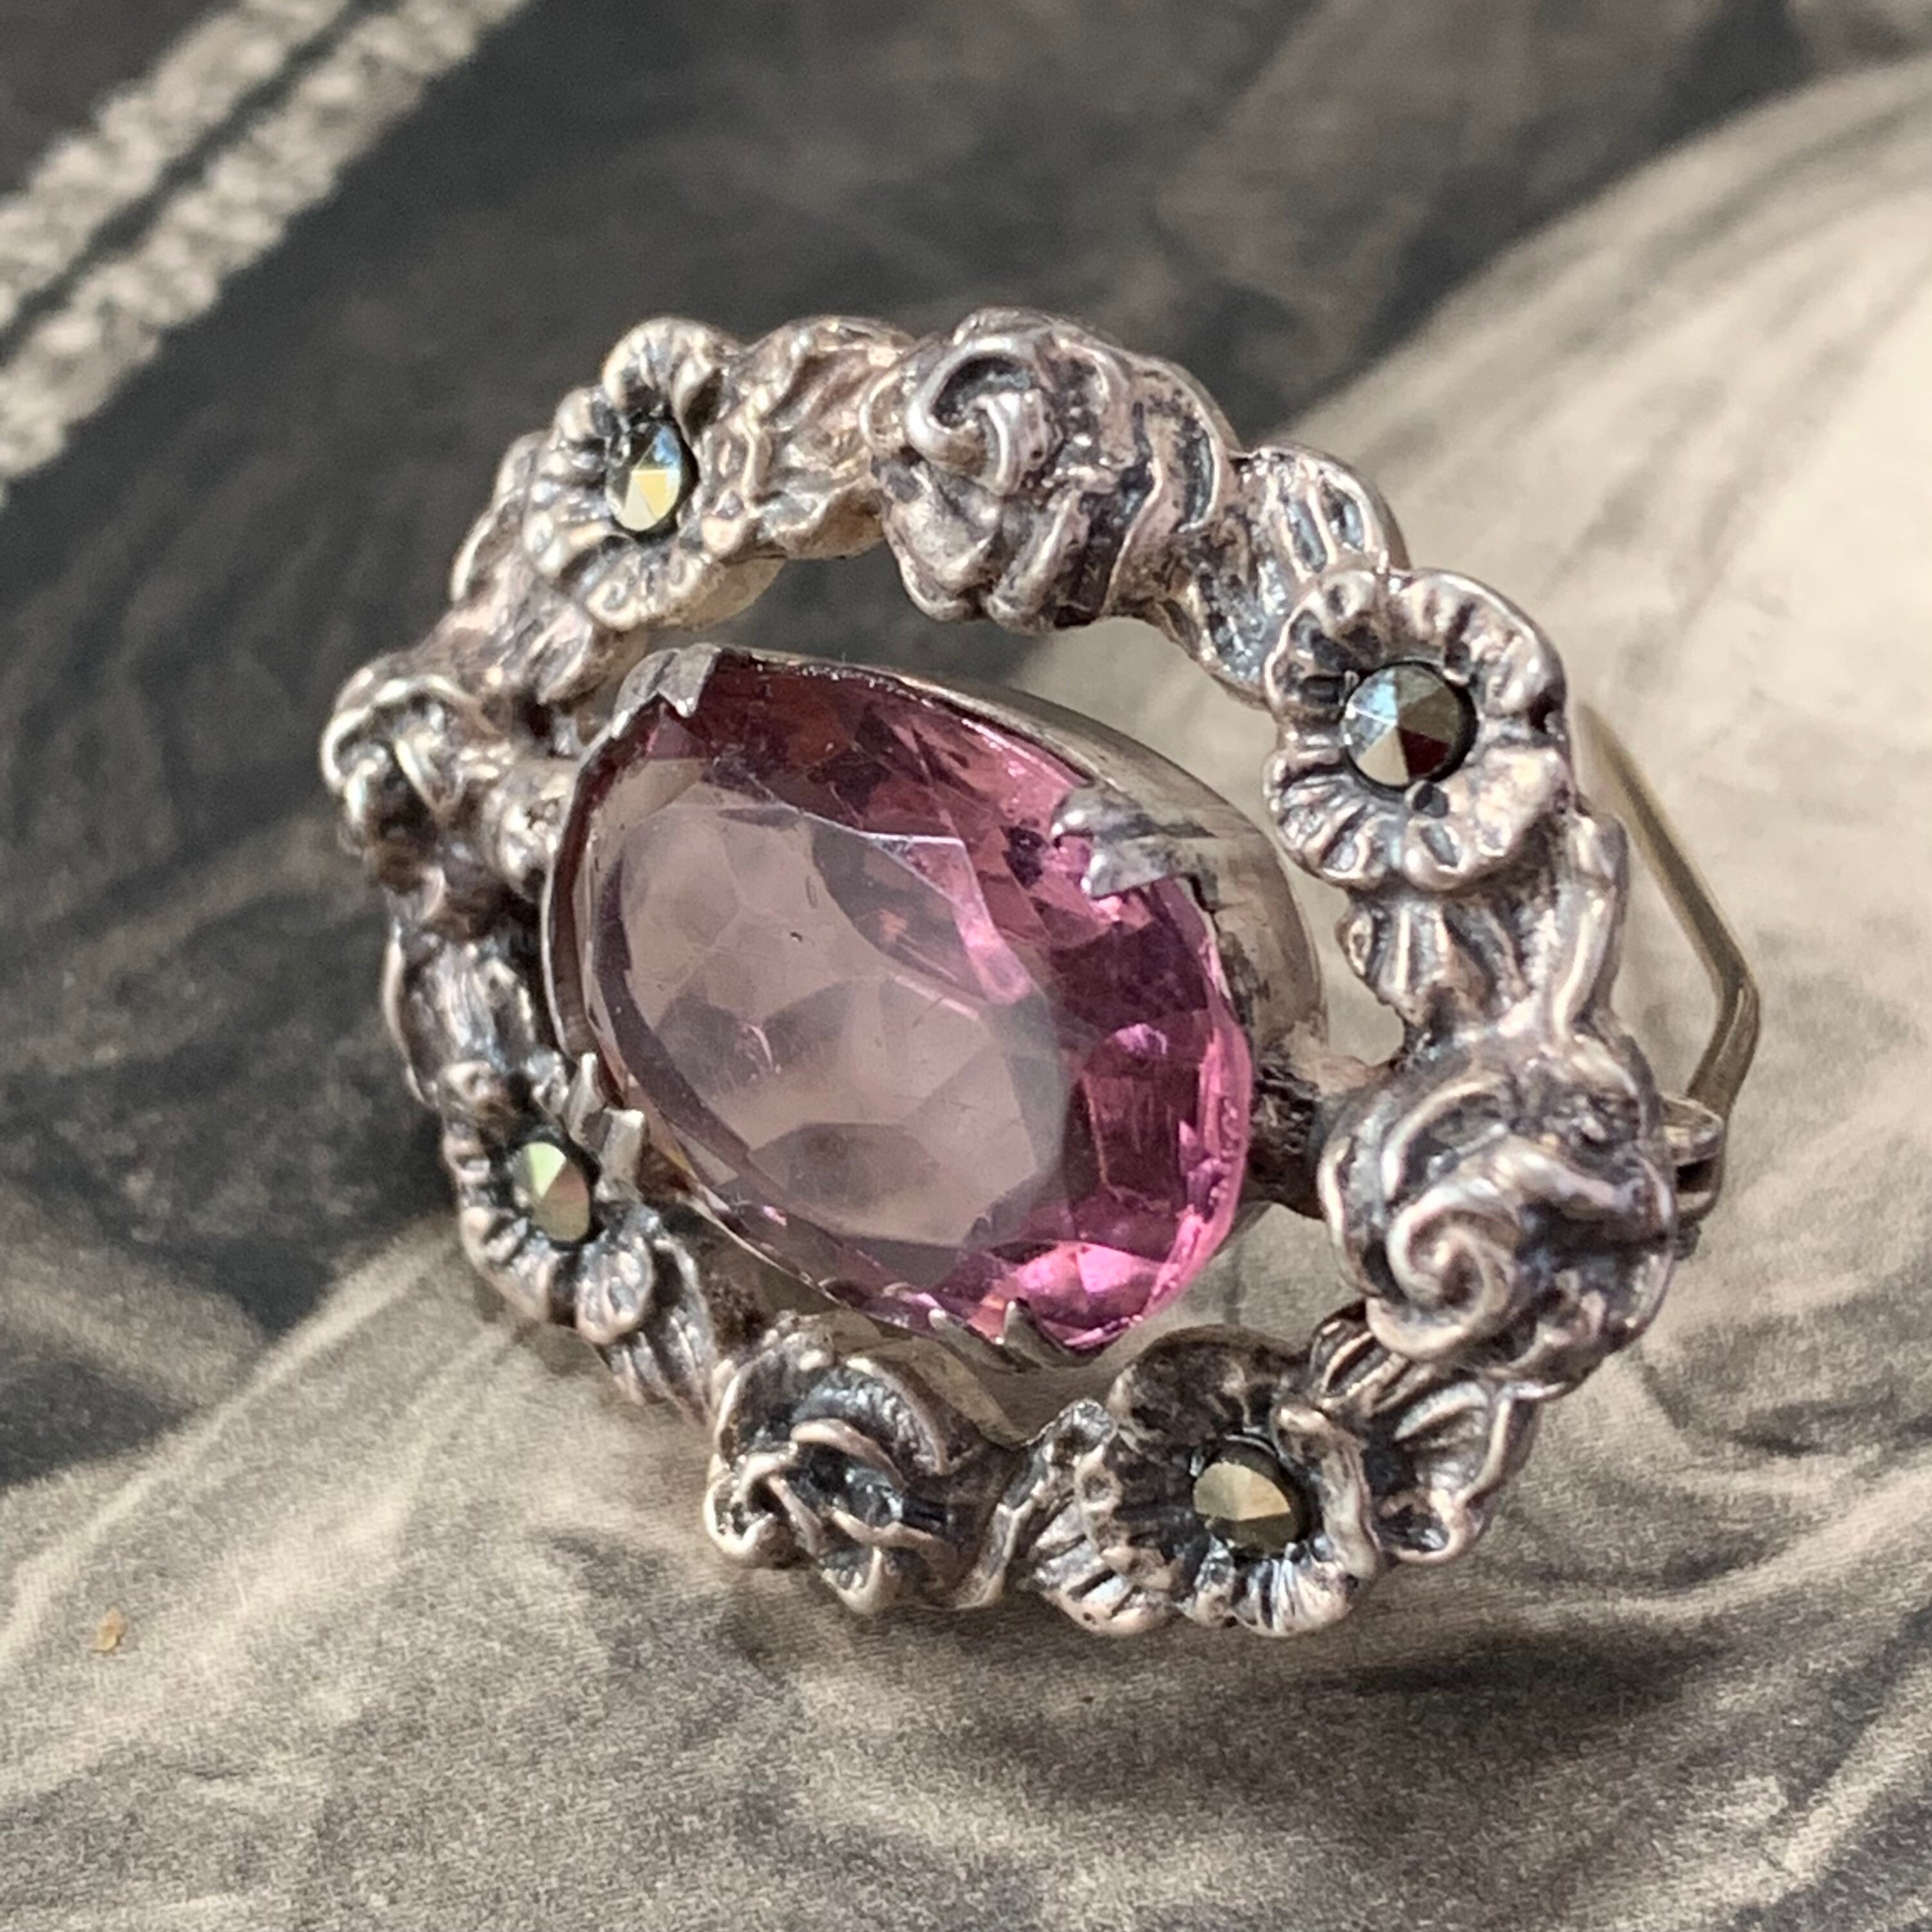 Silver Victorian Brooch Features A Dainty Yet Weighty Design Showcasing Captivating Light Paste Amethyst-Colored Stone At Its Center